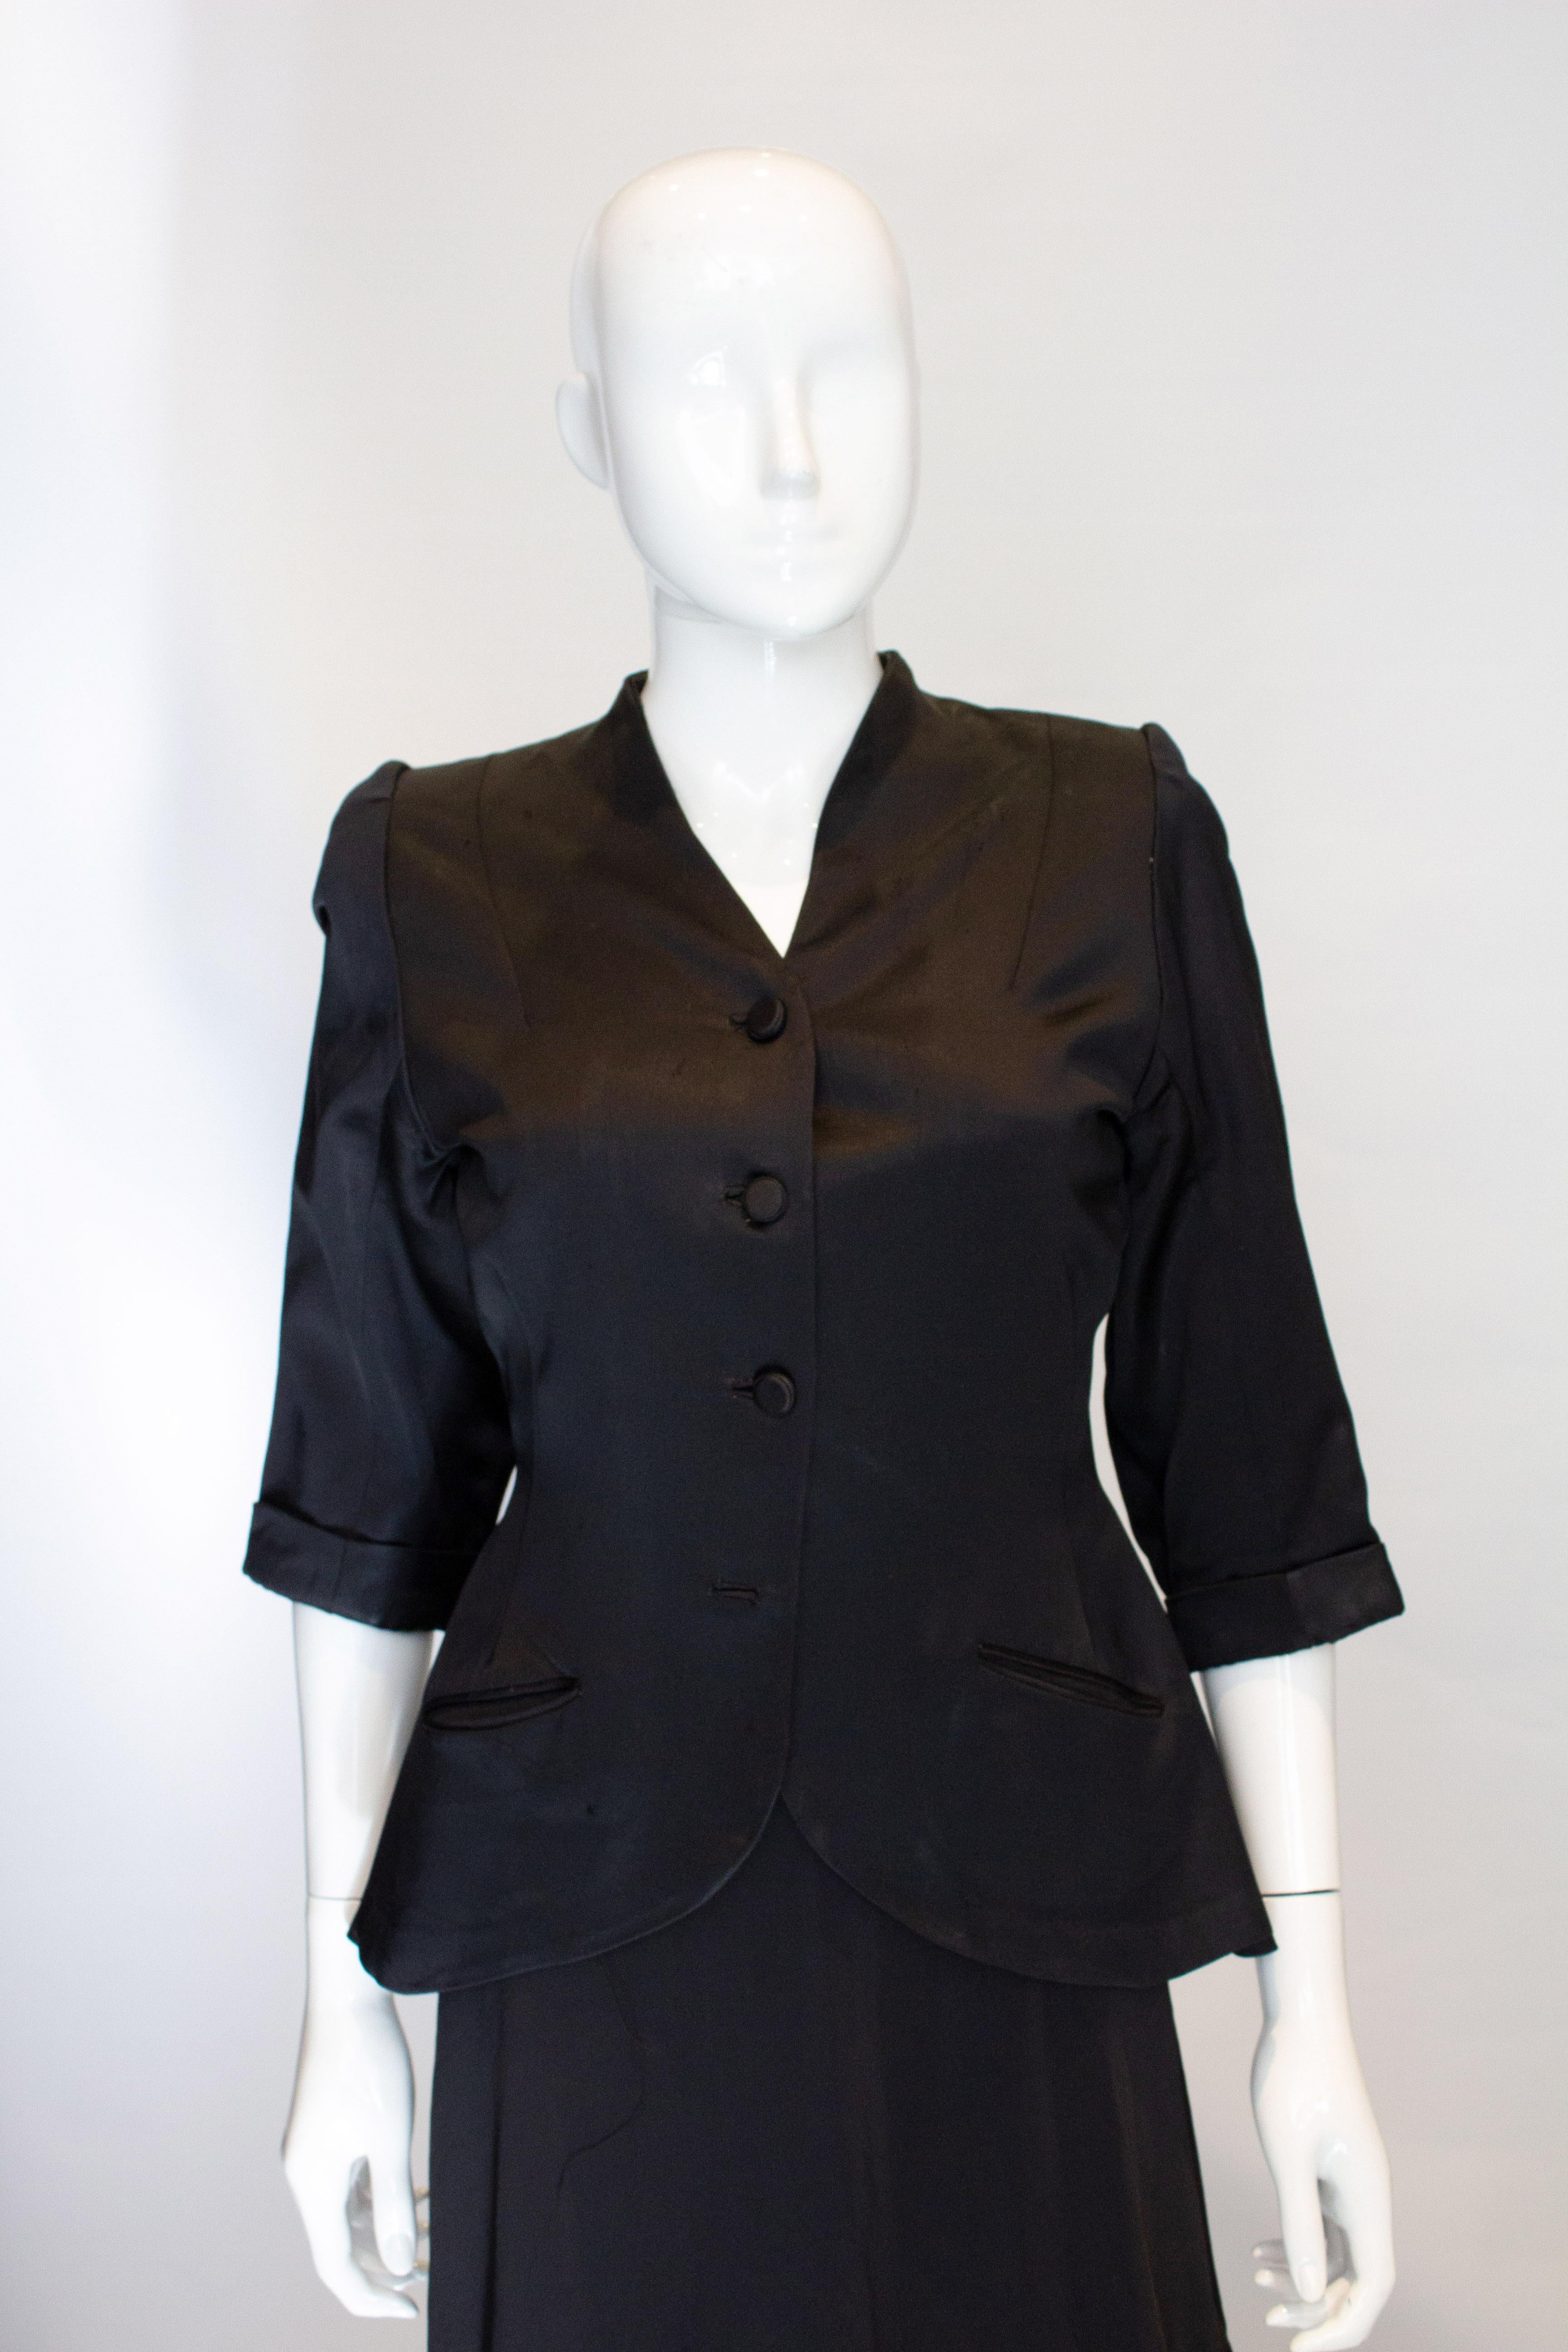 A chic black satin jacket from the 1940s.  The jacket has a v neckline, elbow length sleaves with turn ups, a four button front opening and pockets on either side.
Measurements; Bust 33'', waist 27'', length 25''